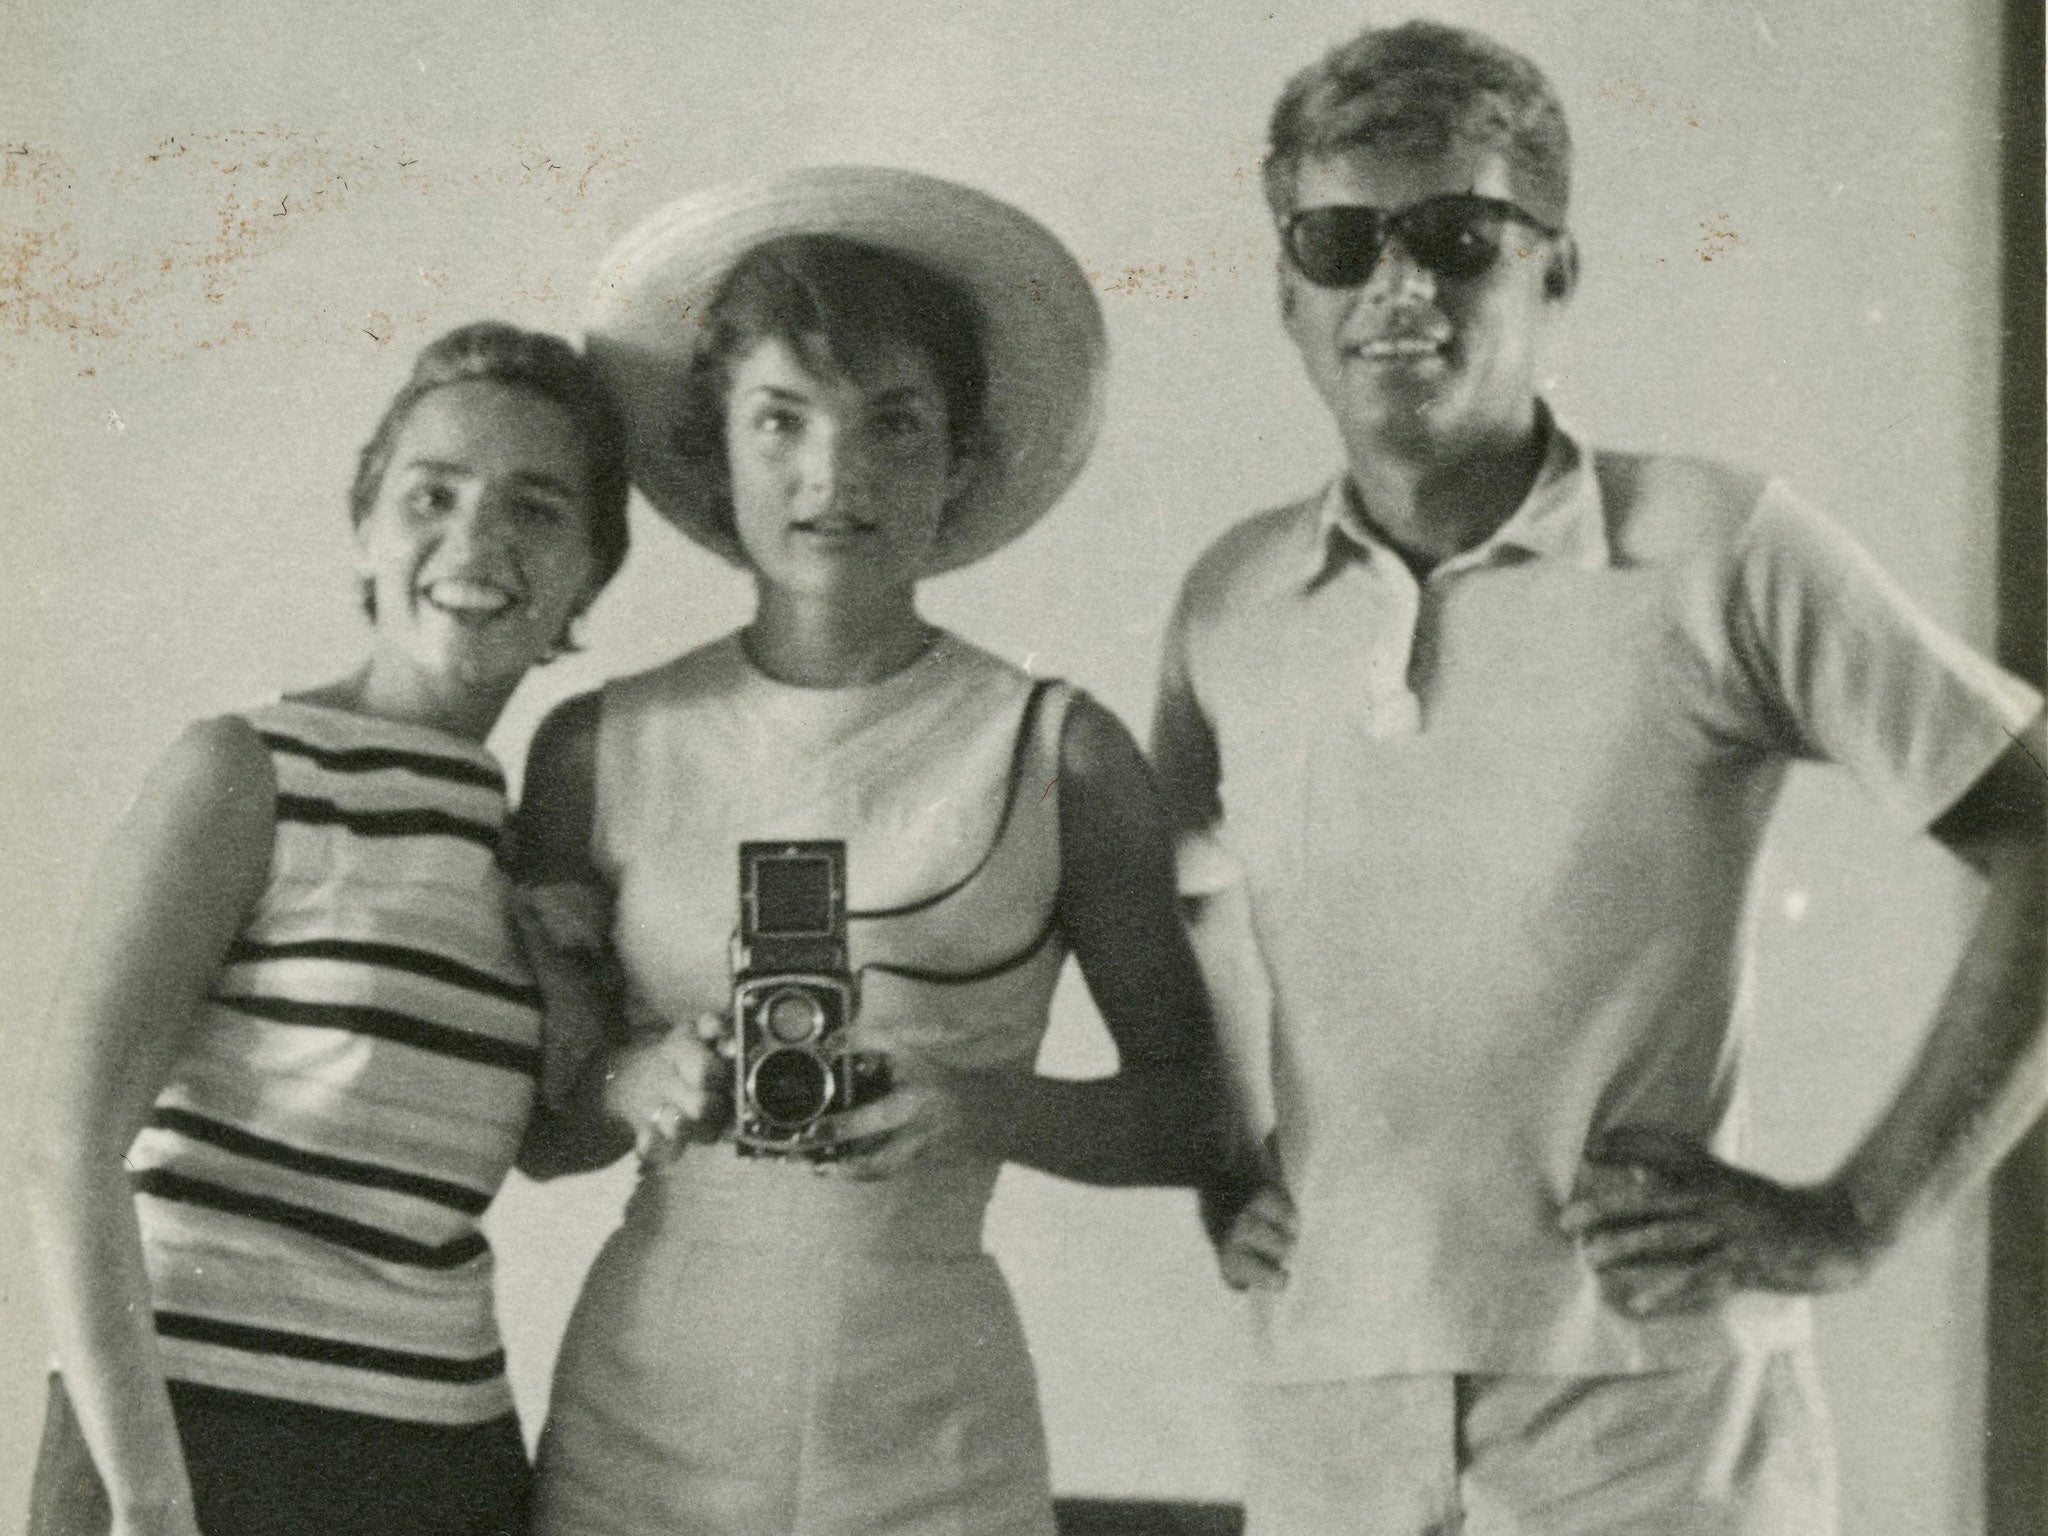 More than 2,000 photographs and other items belonged to David Powers, a close friend of Kennedy’s